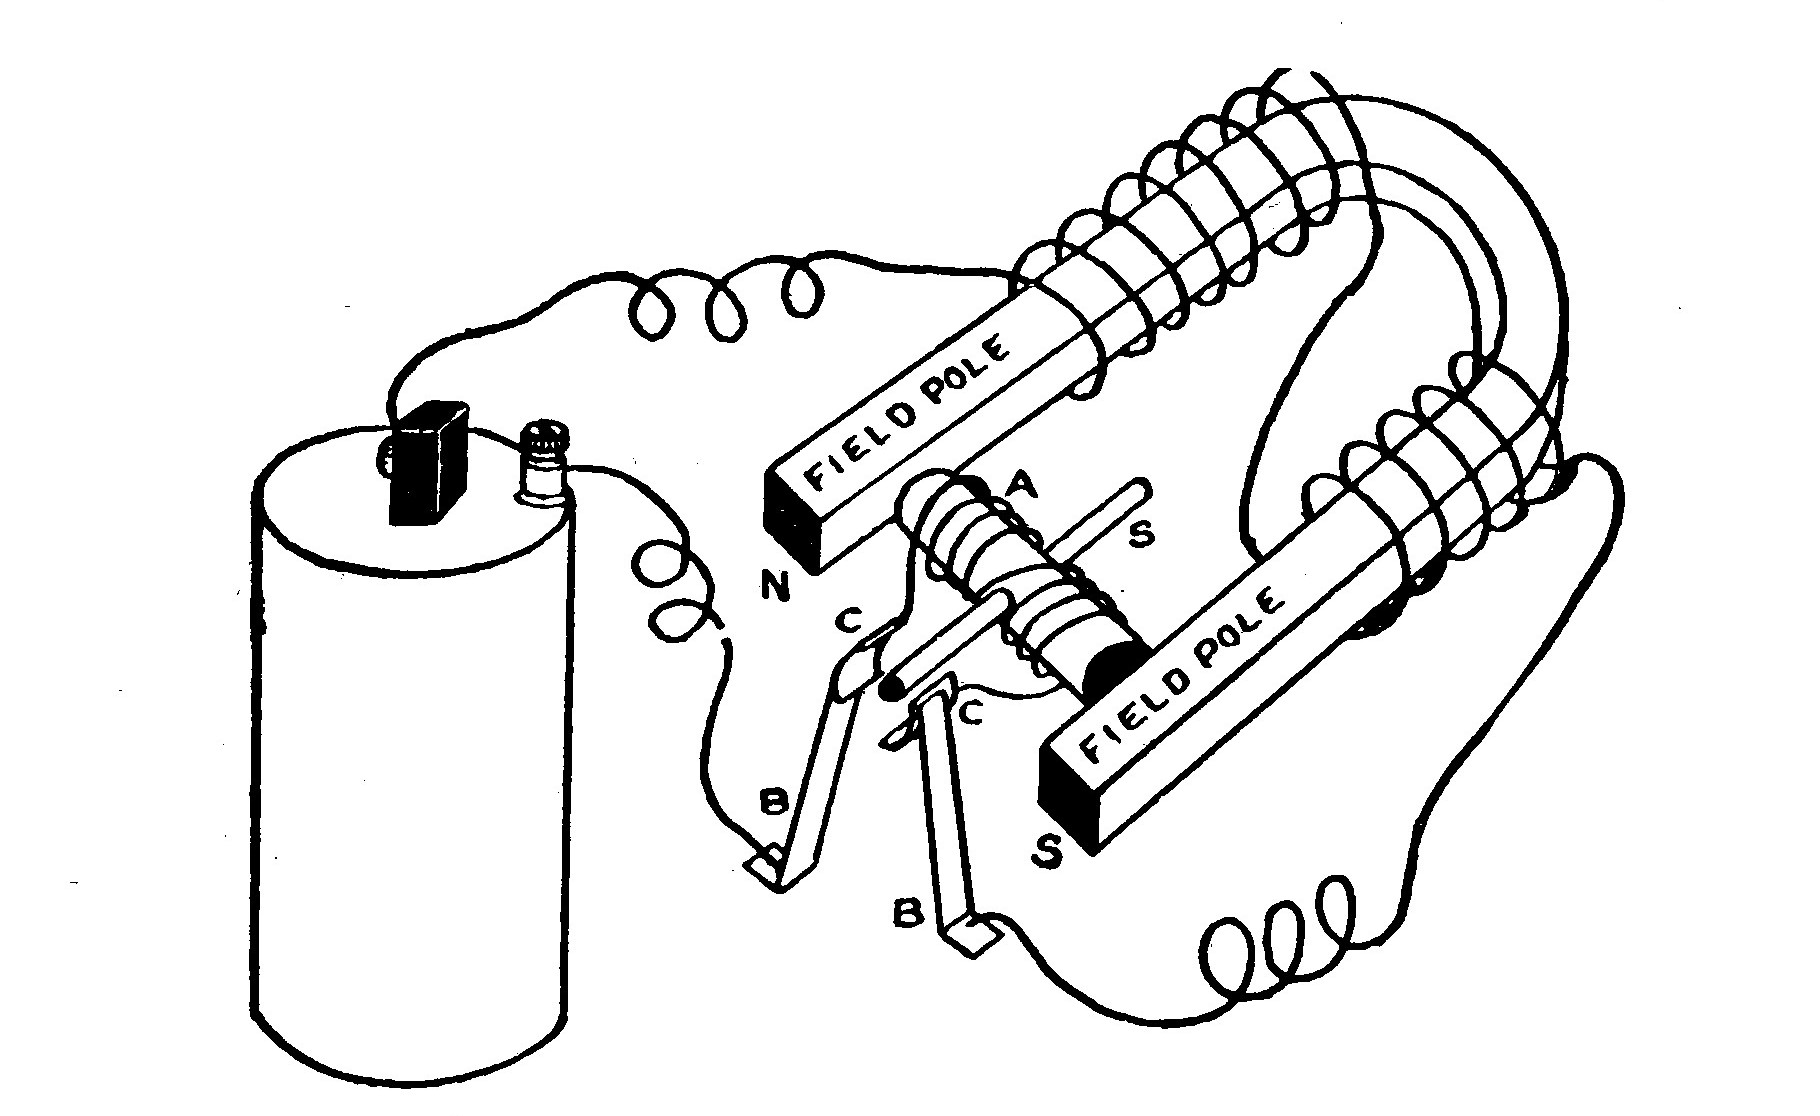 FIG. 6.—The Principle of the Electric Motor.